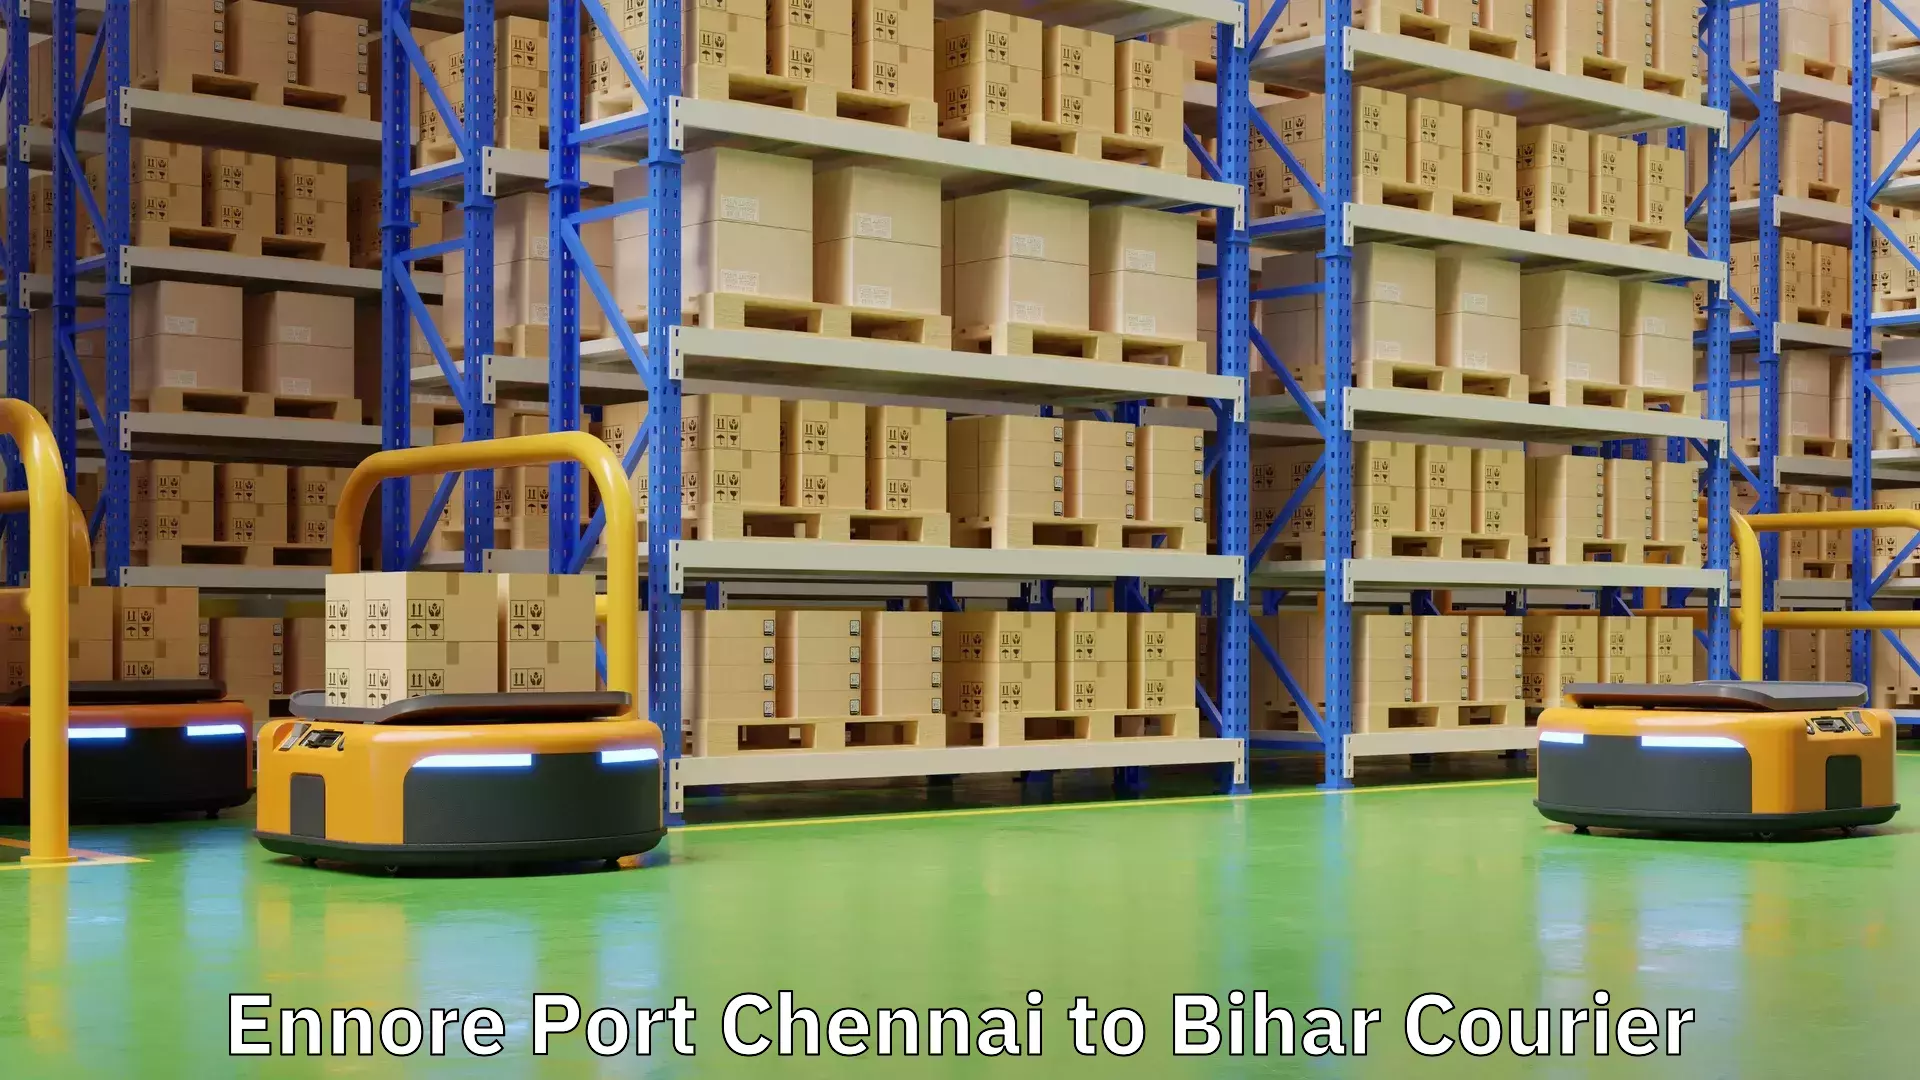 International courier networks in Ennore Port Chennai to Bihar